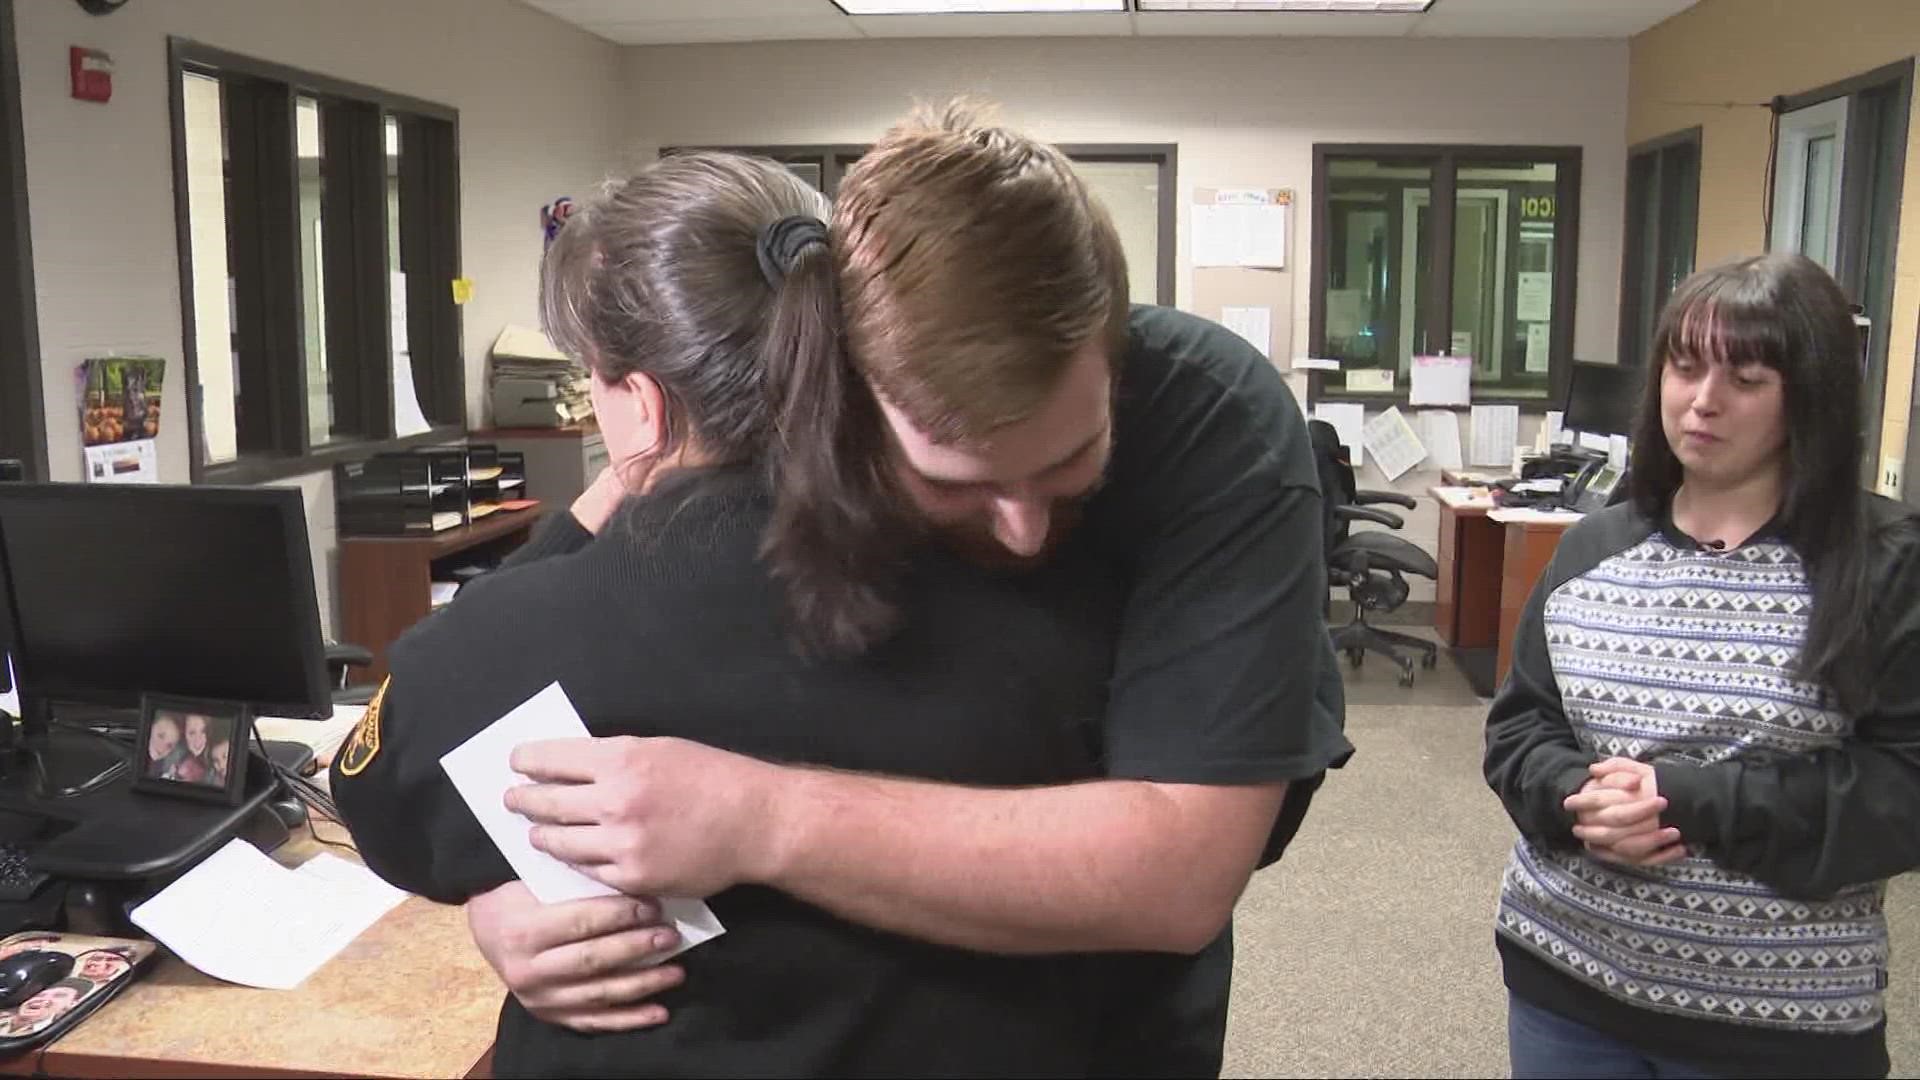 Dispatcher Christina Lamtman walked a Middlefield woman's fiancé through CPR over the phone after she stopped breathing during a severe asthma attack.